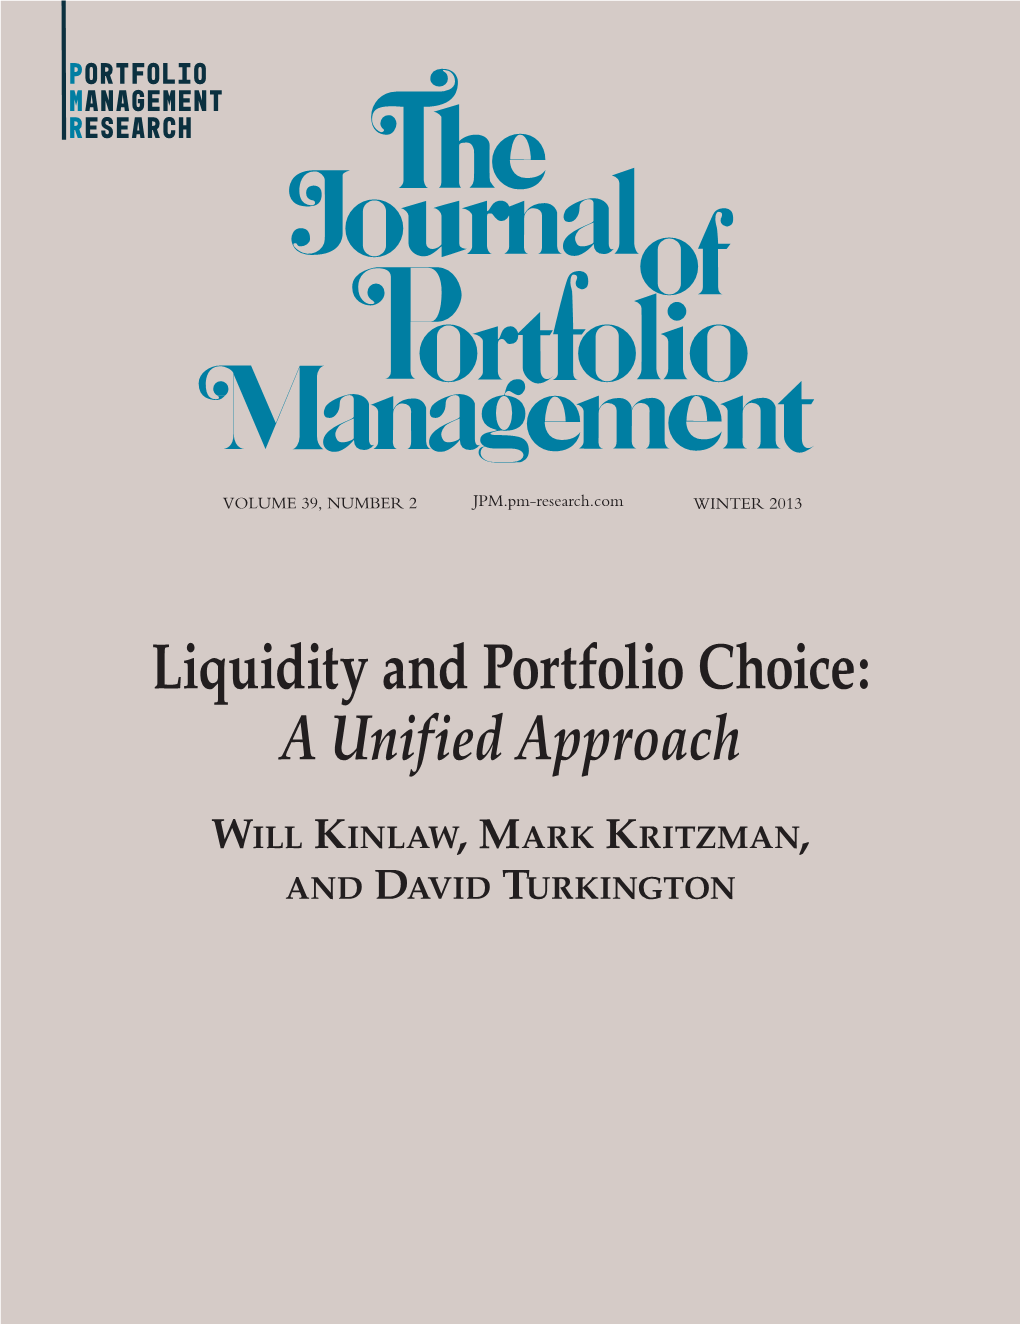 Liquidity and Portfolio Choice: a Unified Approach